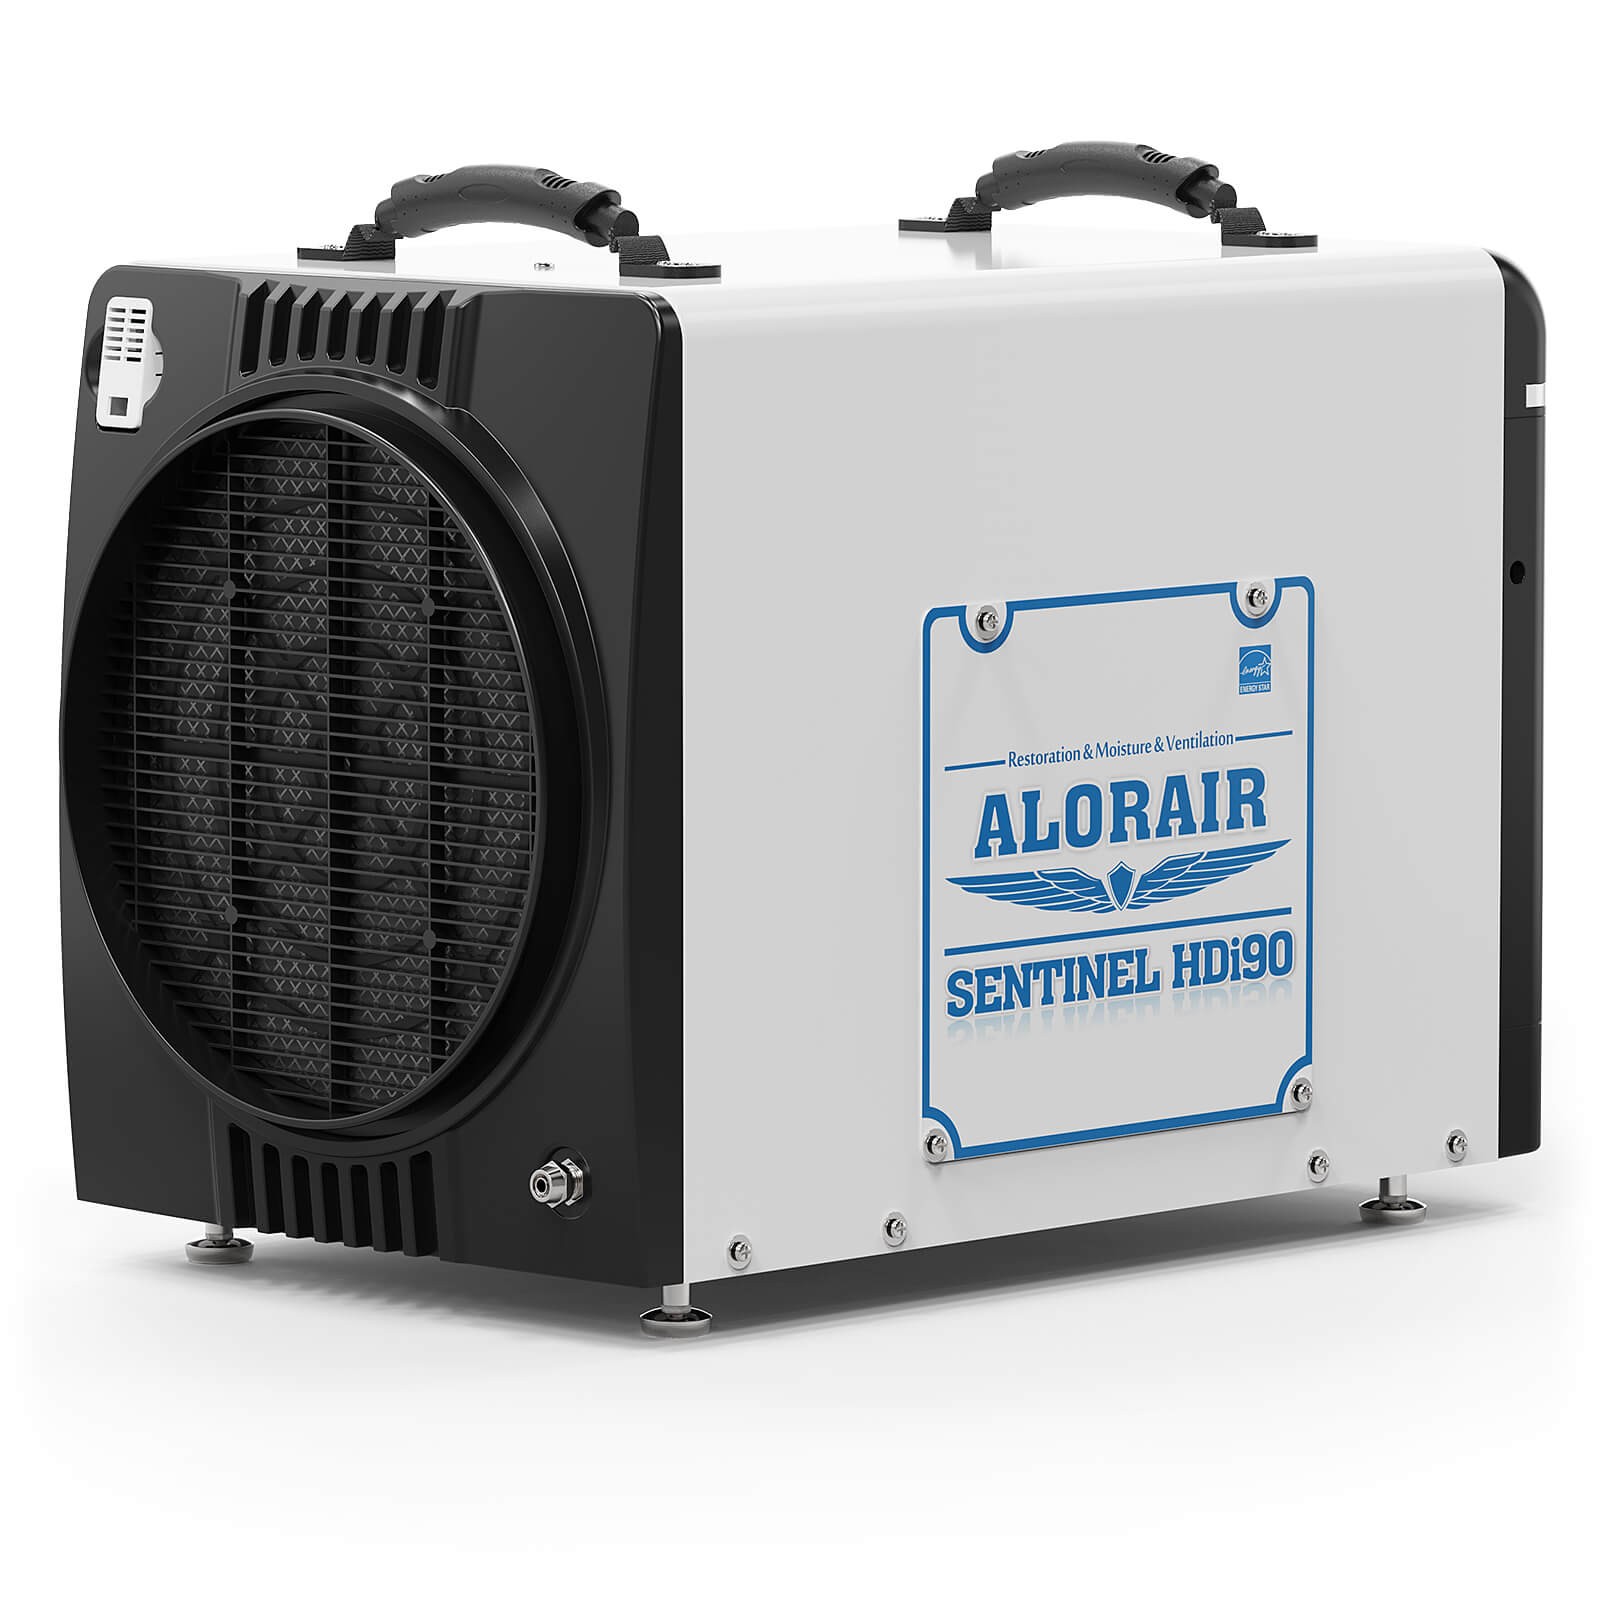 AlorAir Sentinel Energy Star 90 Pint at AHAM Dehumidifier for Crawl Spaces, Basements, or Water Damage Up to 2,600 Sq. Ft. - Ducted - Main - Primary View